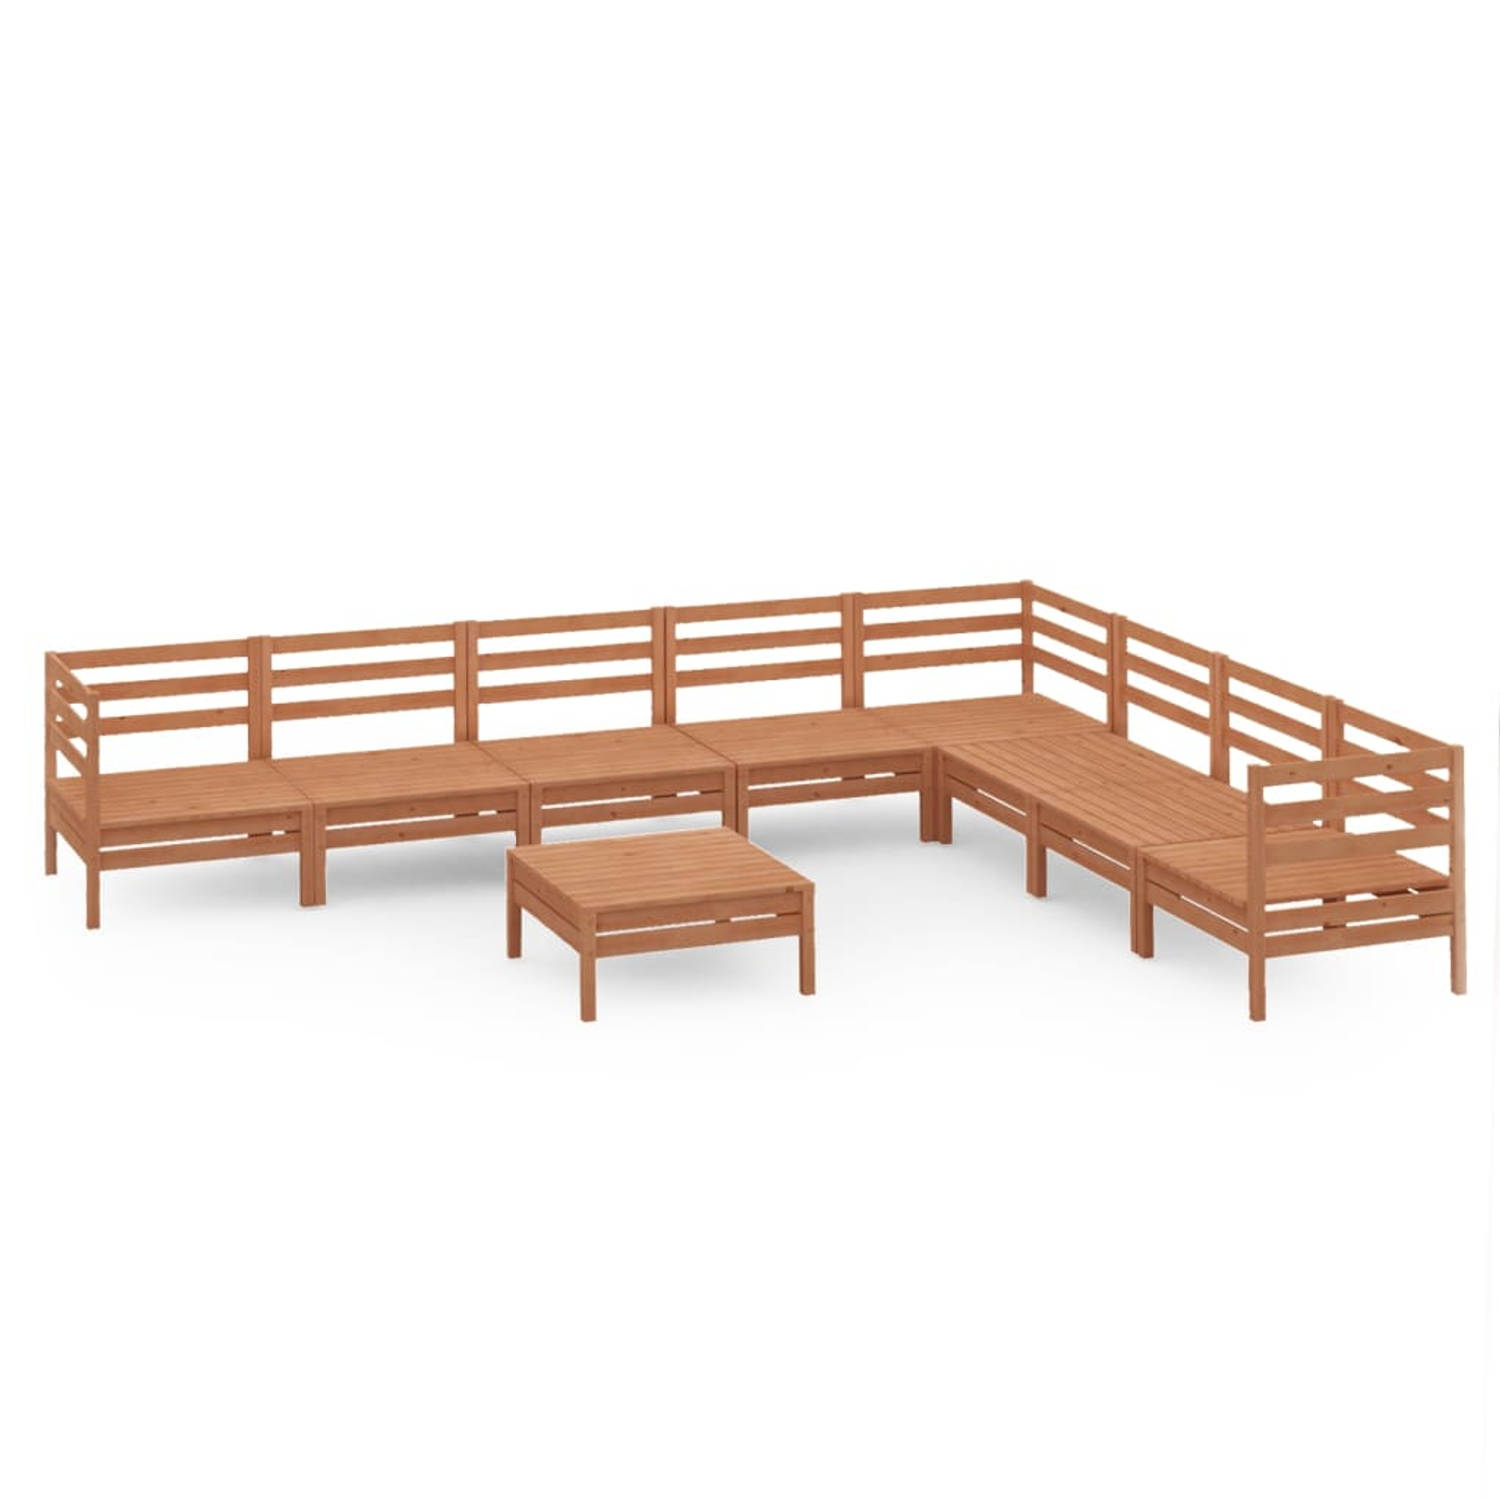 The Living Store 9-delige Loungeset massief grenenhout honingbruin - Tuinset